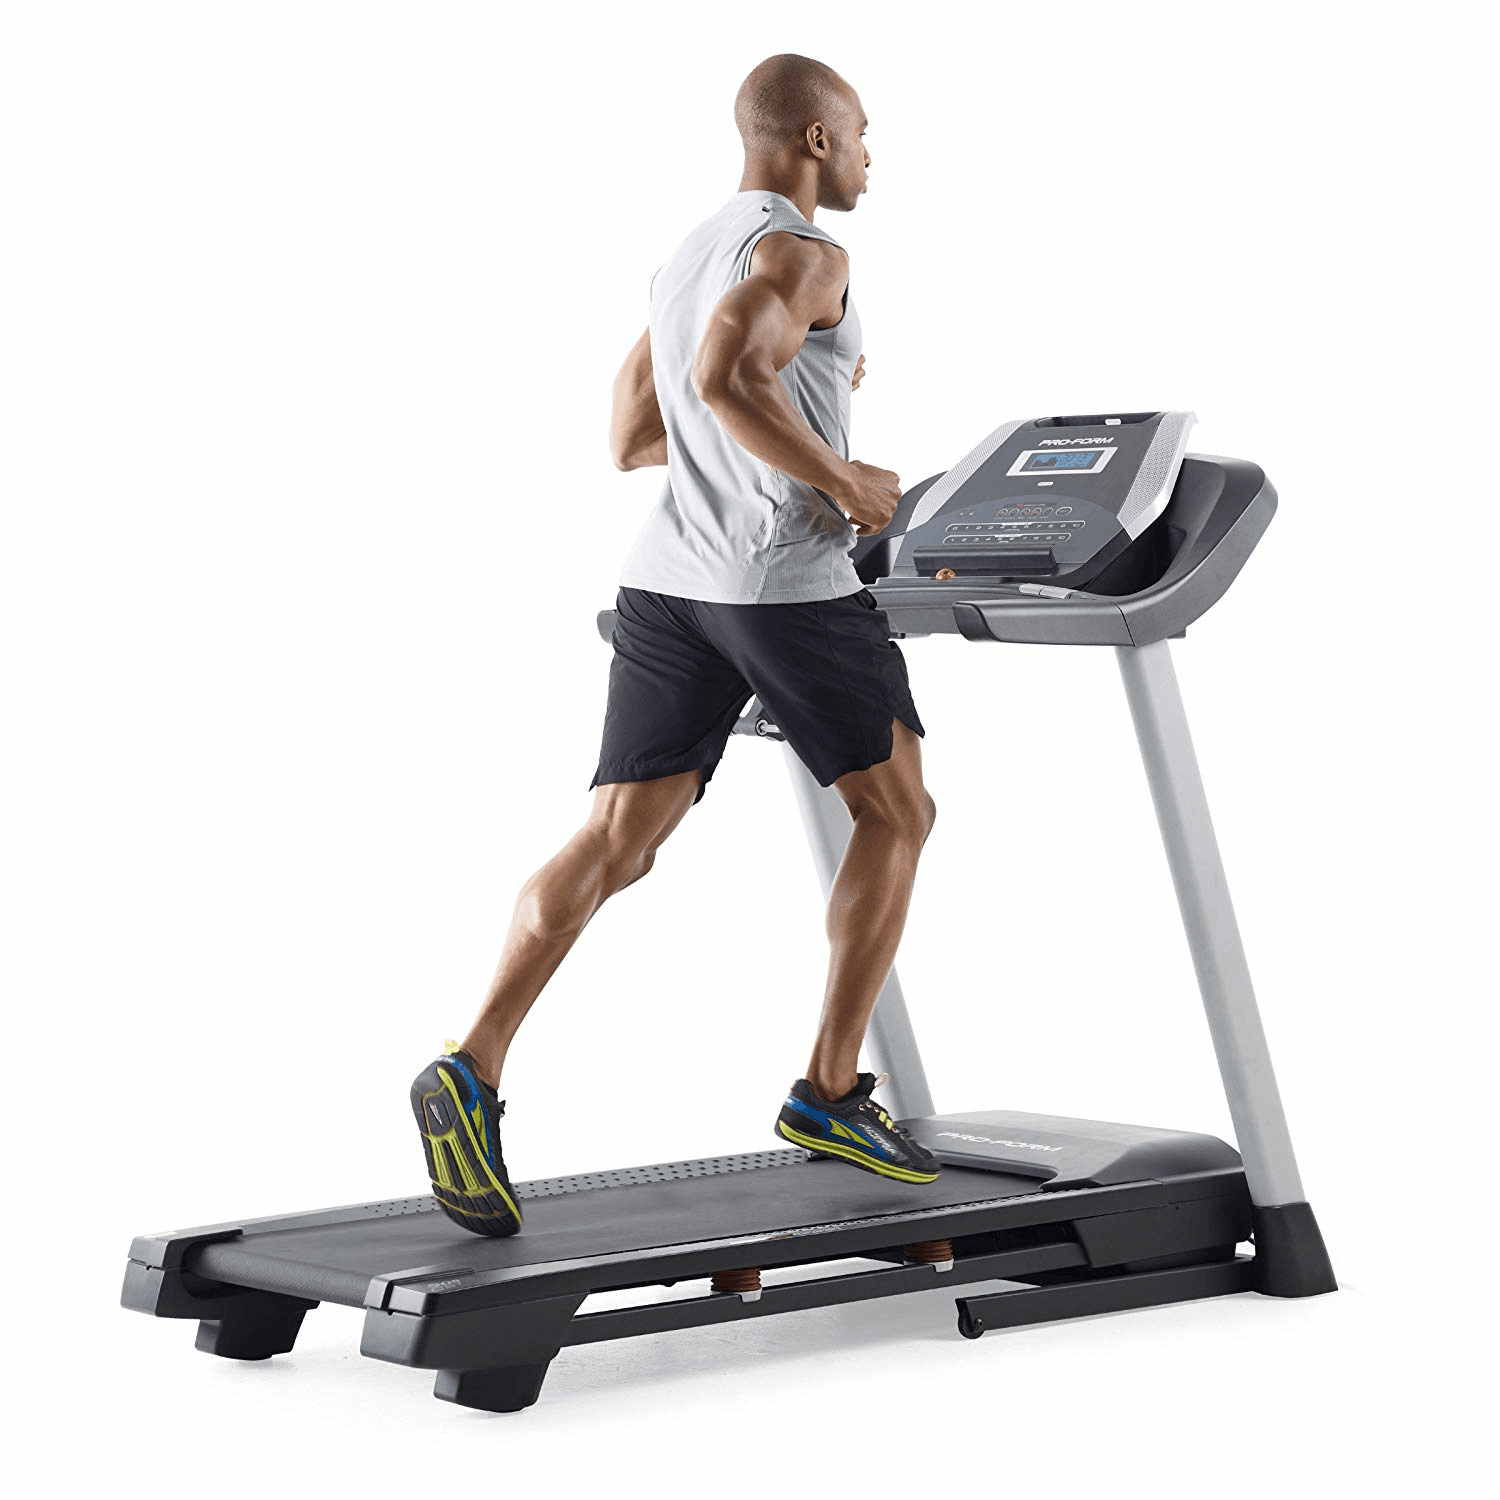 A fit man in athletic attire running on the ProForm 505 CST treadmill